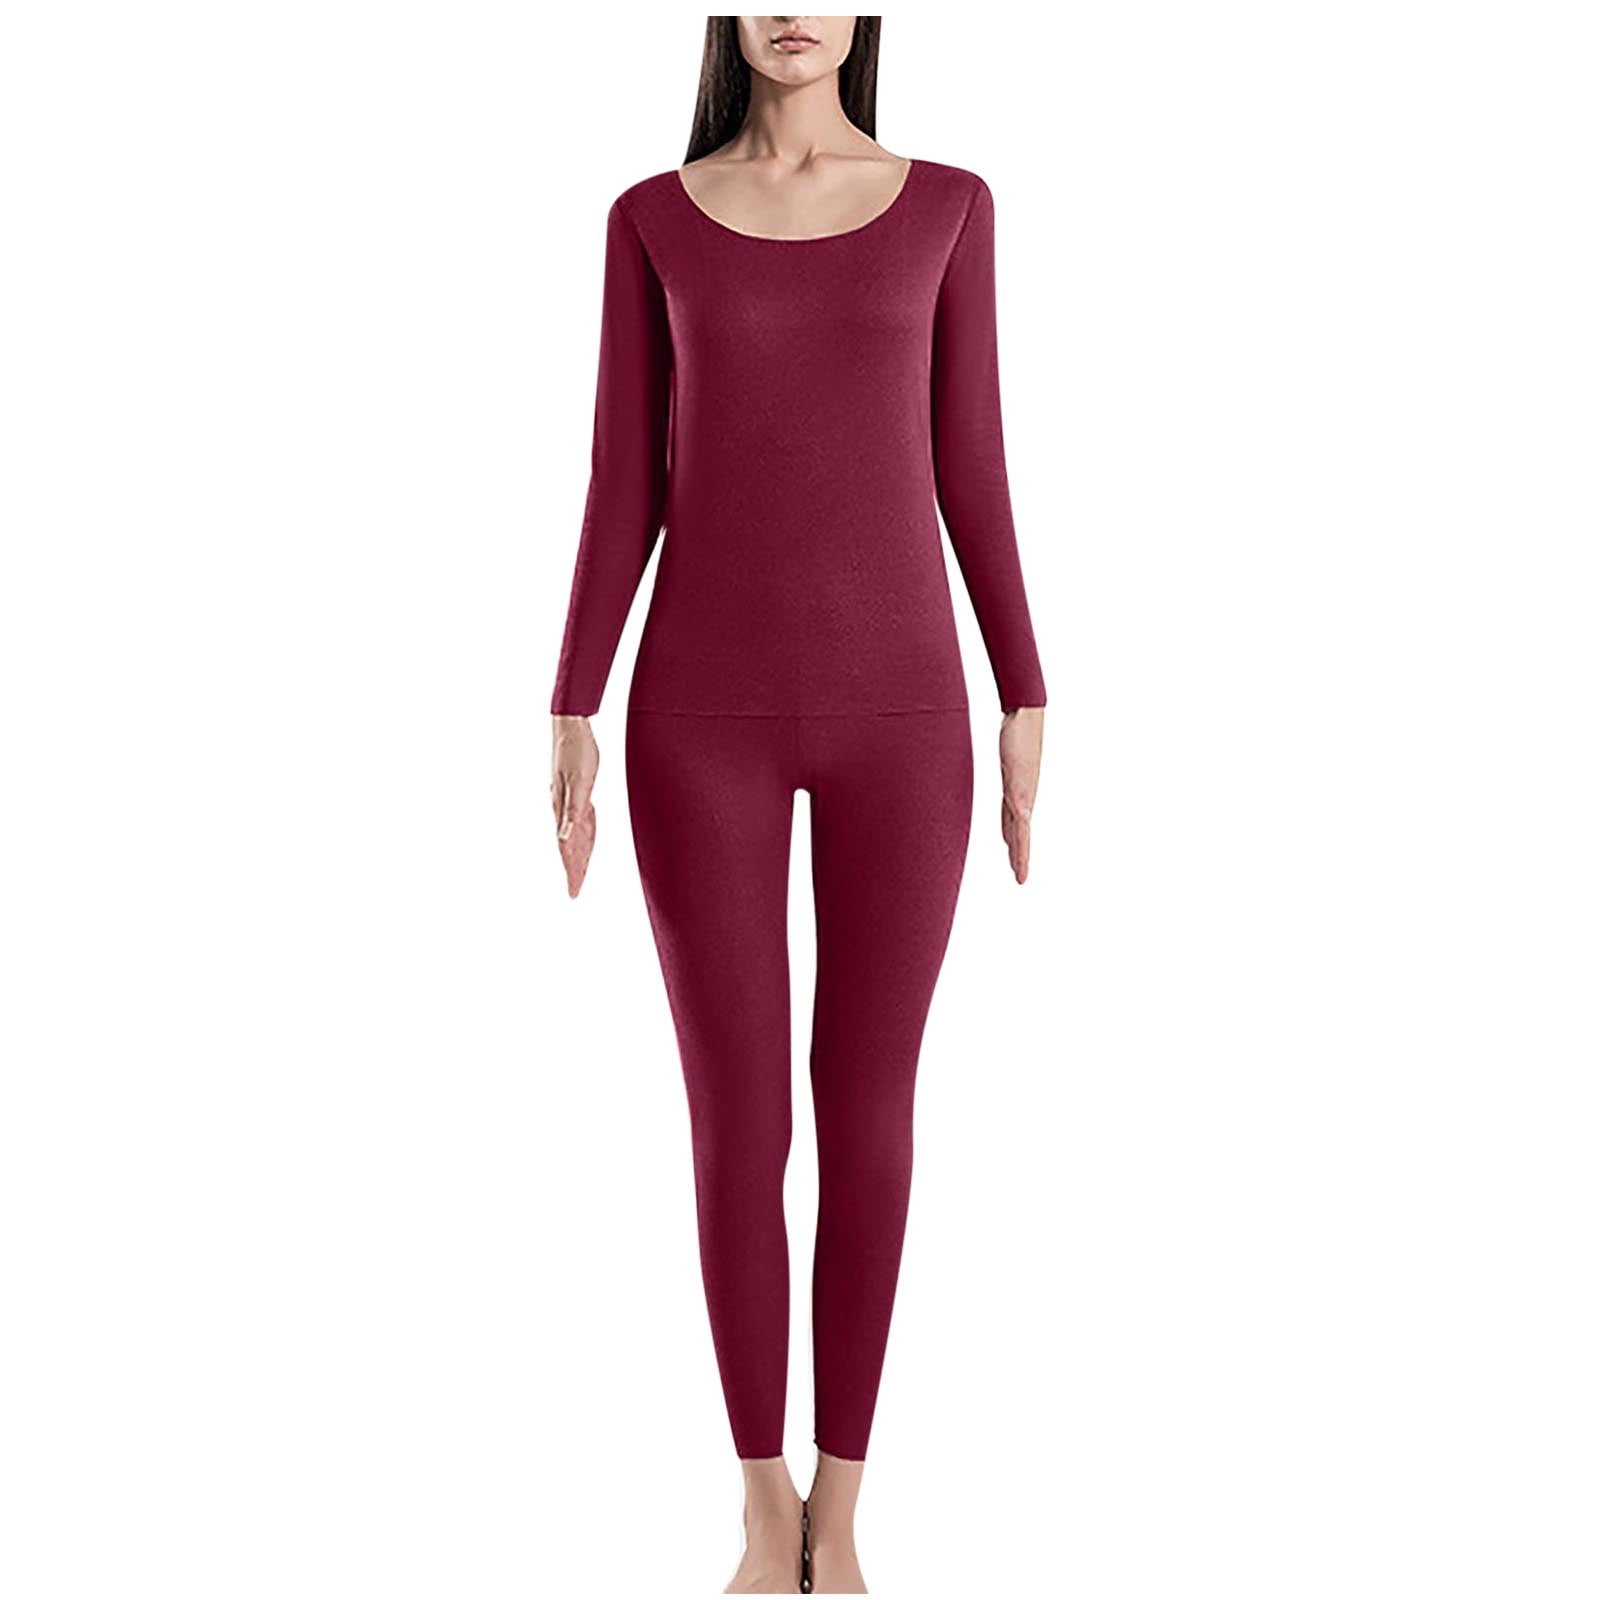 Women's Thermal Underwear Set Soft Cozy Long Johns Winter Warm Base Layer  Top & Bottom Pajama Set for Cold Weather Womens Clothes 